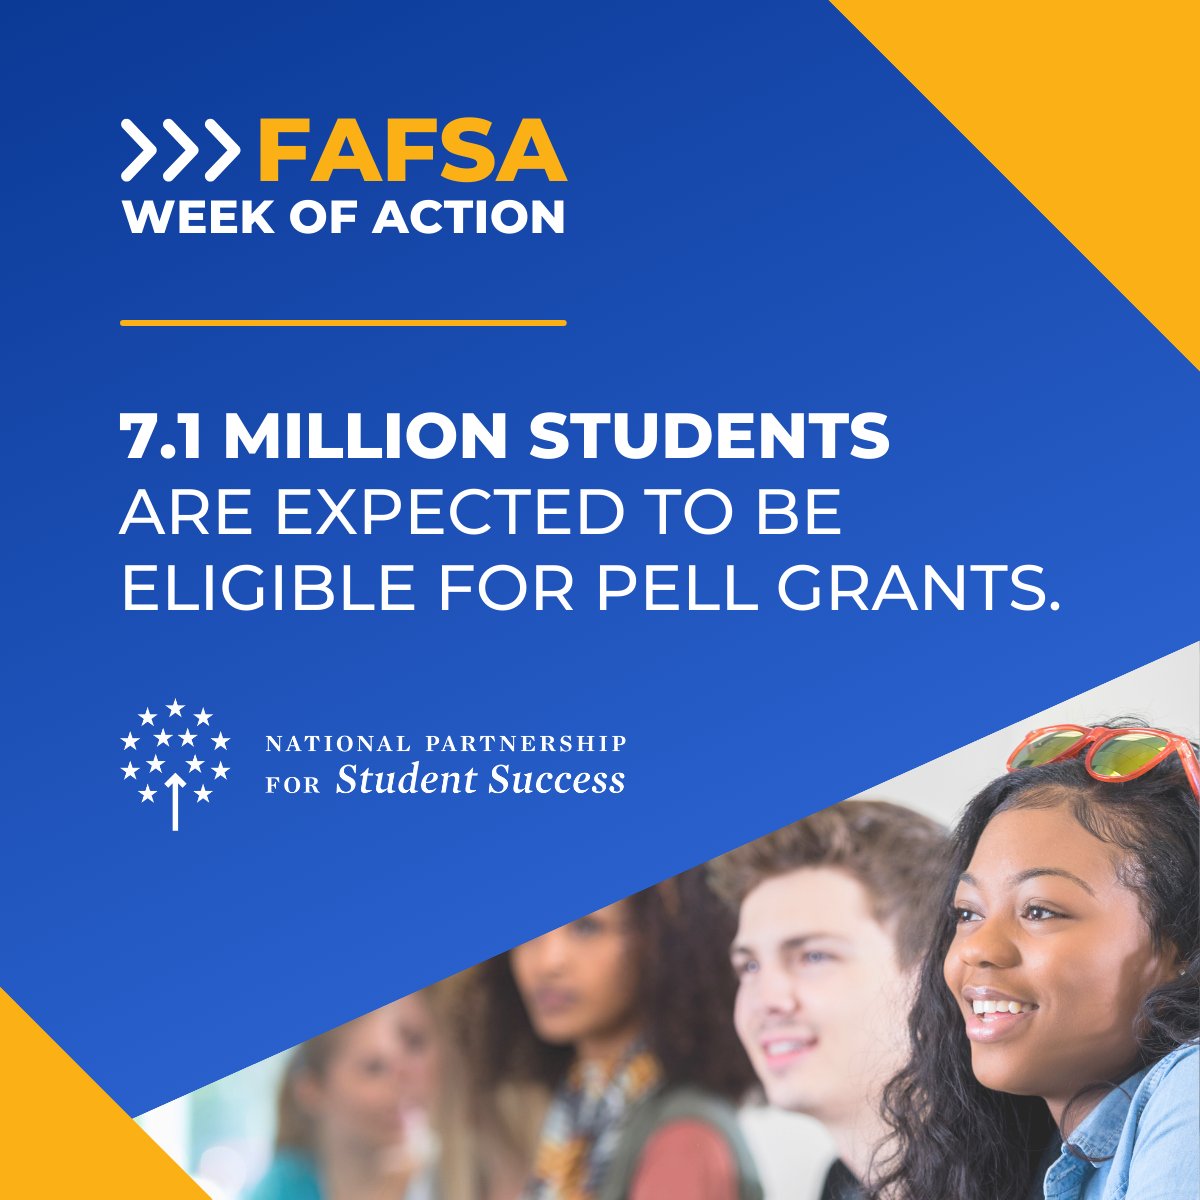 Supporting youth to complete the #FAFSA? 🤔 Share these resources students & families in your community to help check #FinancialAid off college to-do lists! ✅ bit.ly/43ZGMQH

#HigherEd #BetterFAFSA